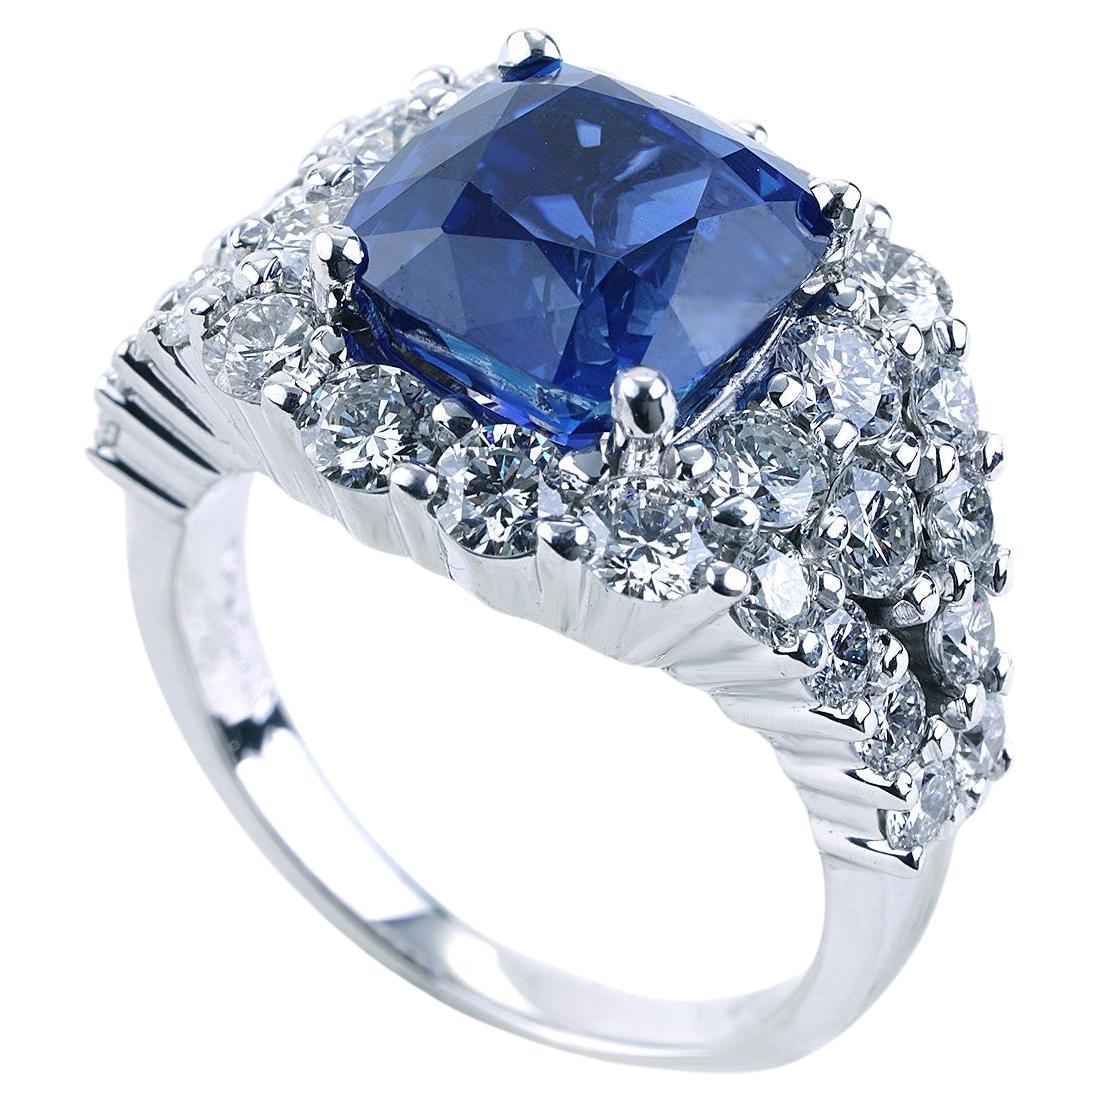 5.42 CT GIA Certified Unheated Blue Ceylon Sapphire and Diamond Ring 18K Gold